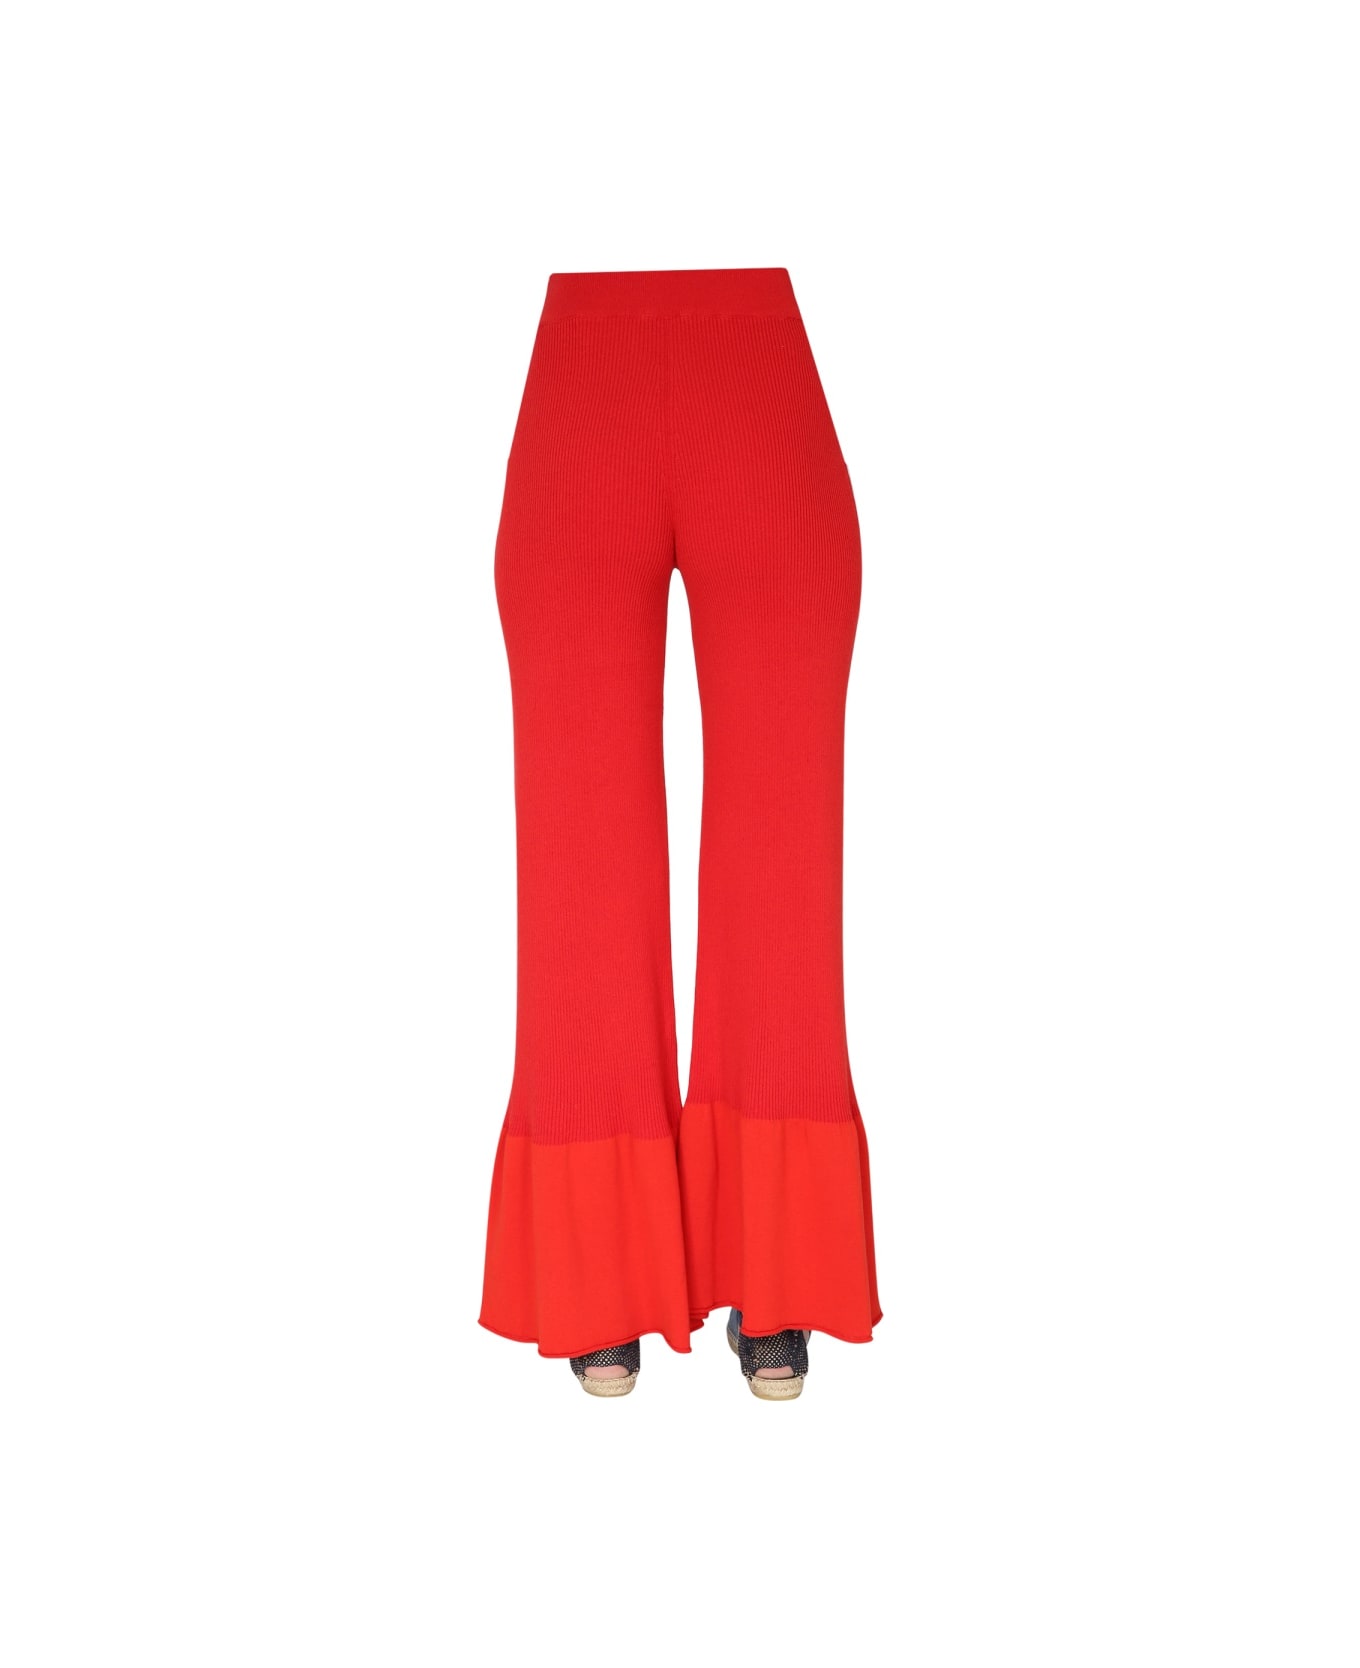 Stella McCartney Ribbed Knit Trousers - RED